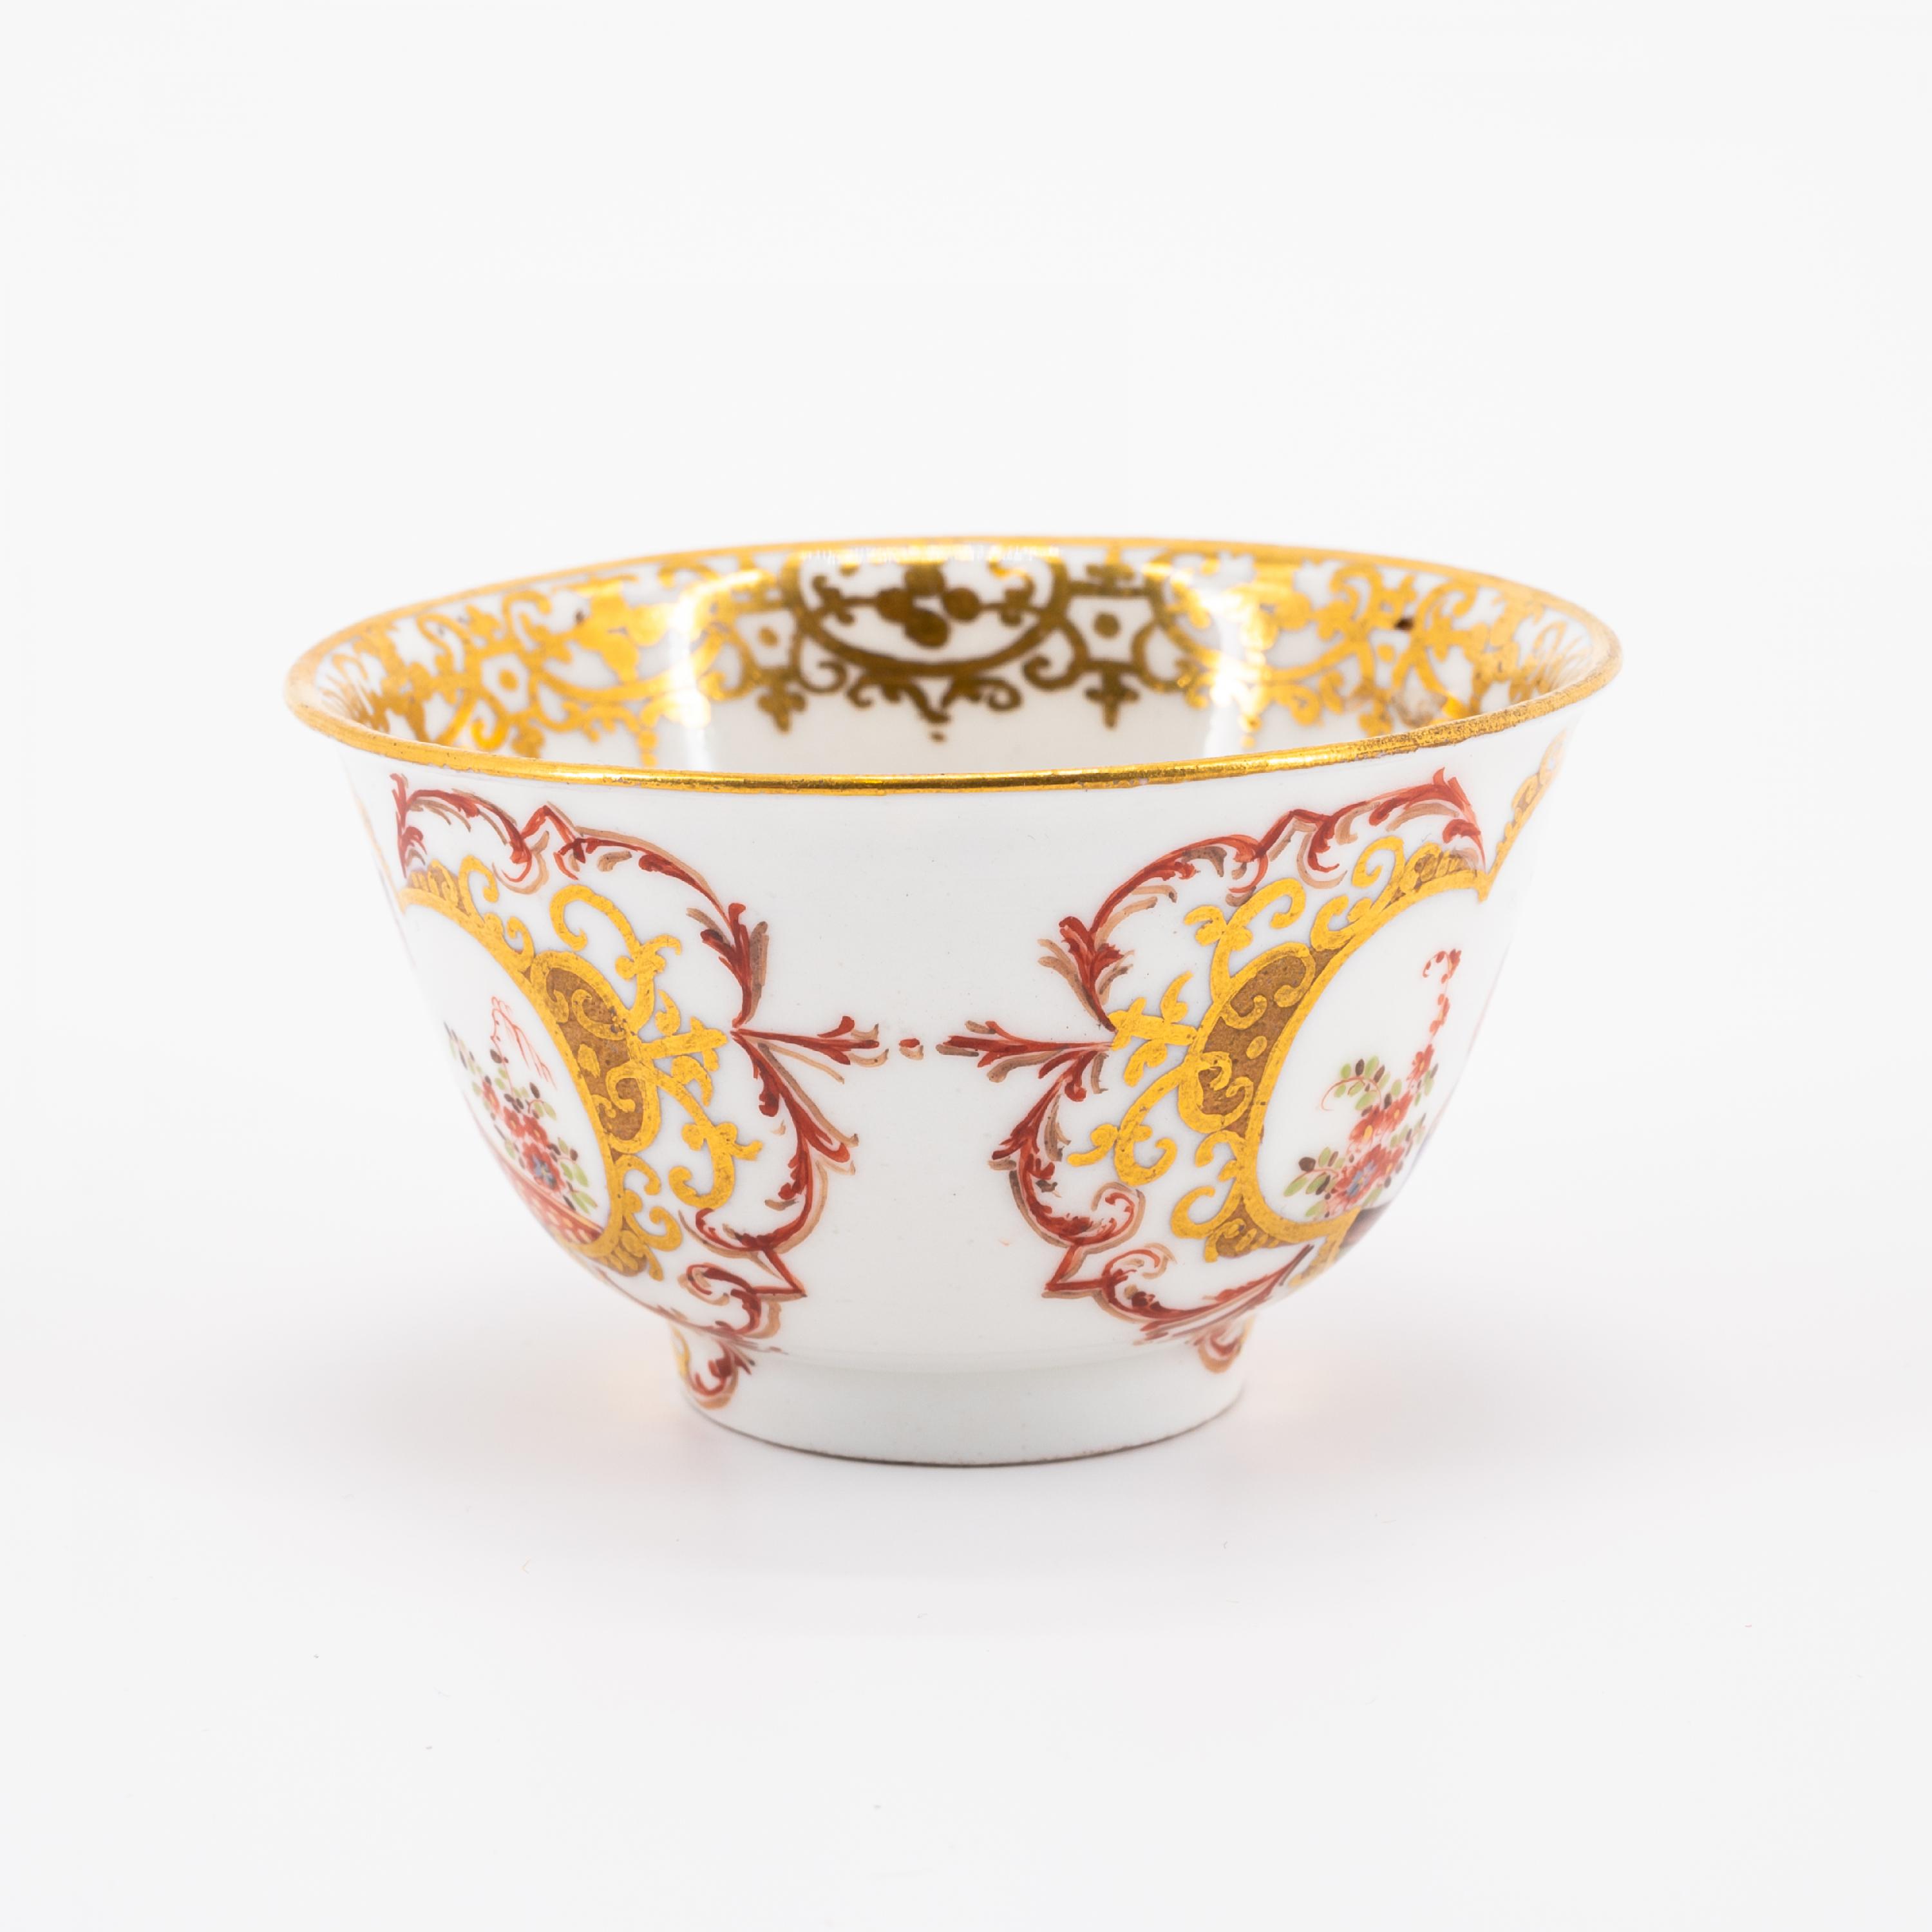 PORCELAIN TEA BOWL WITH CHINOISERIES - Image 2 of 6